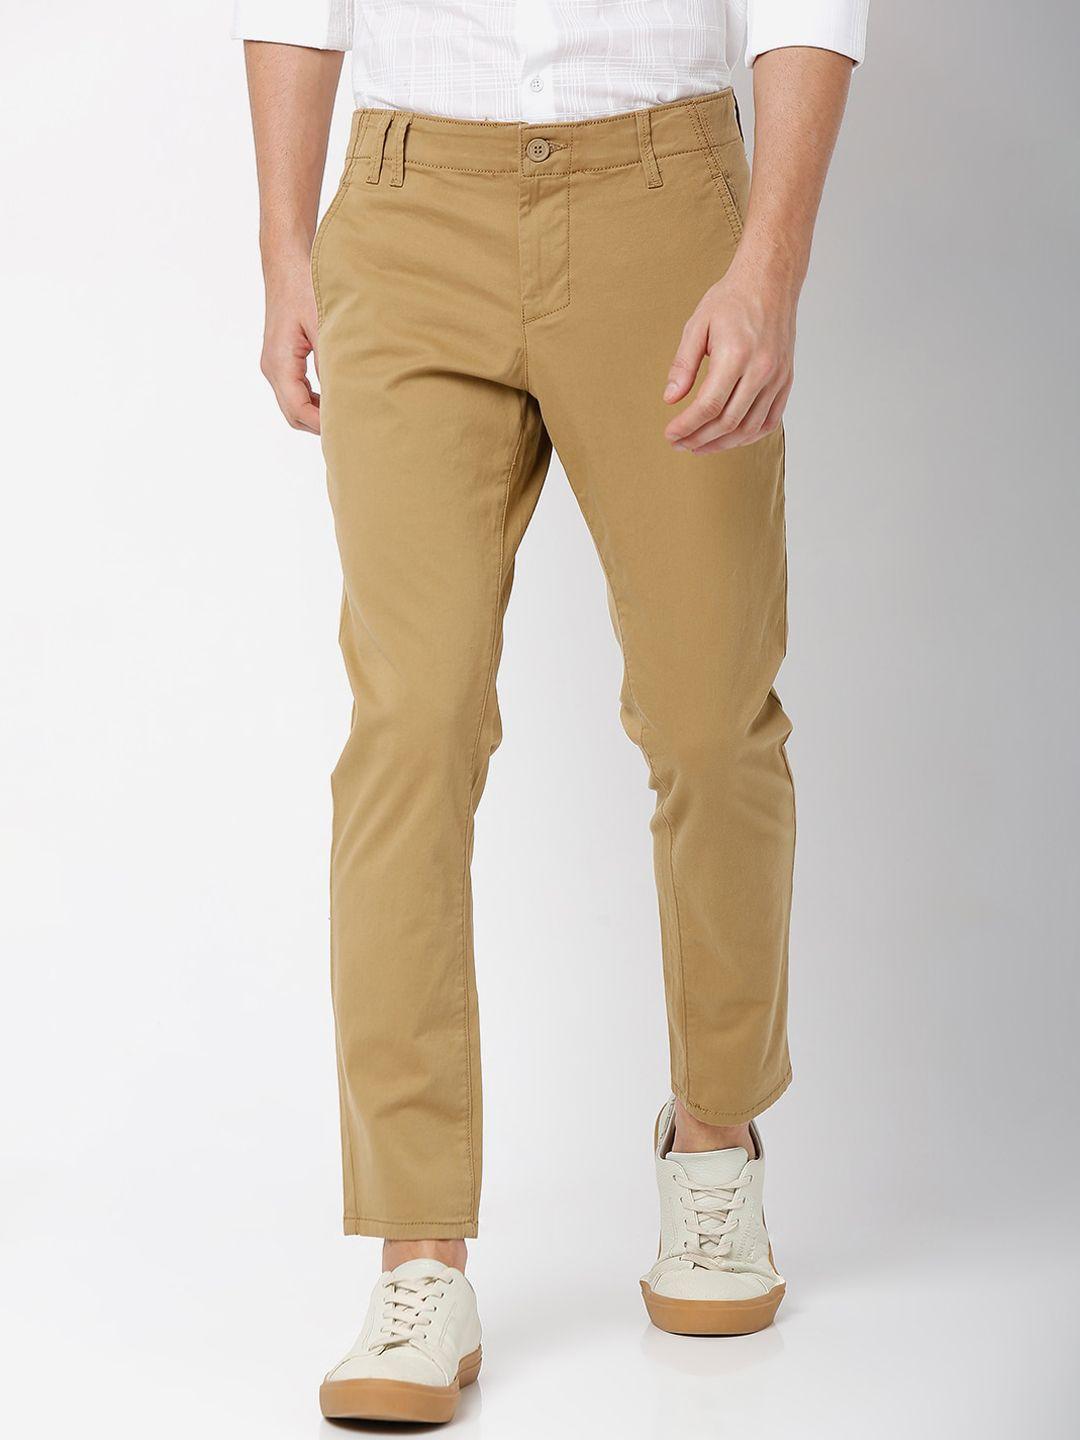 mufti men slim fit mid rise chinos trousers